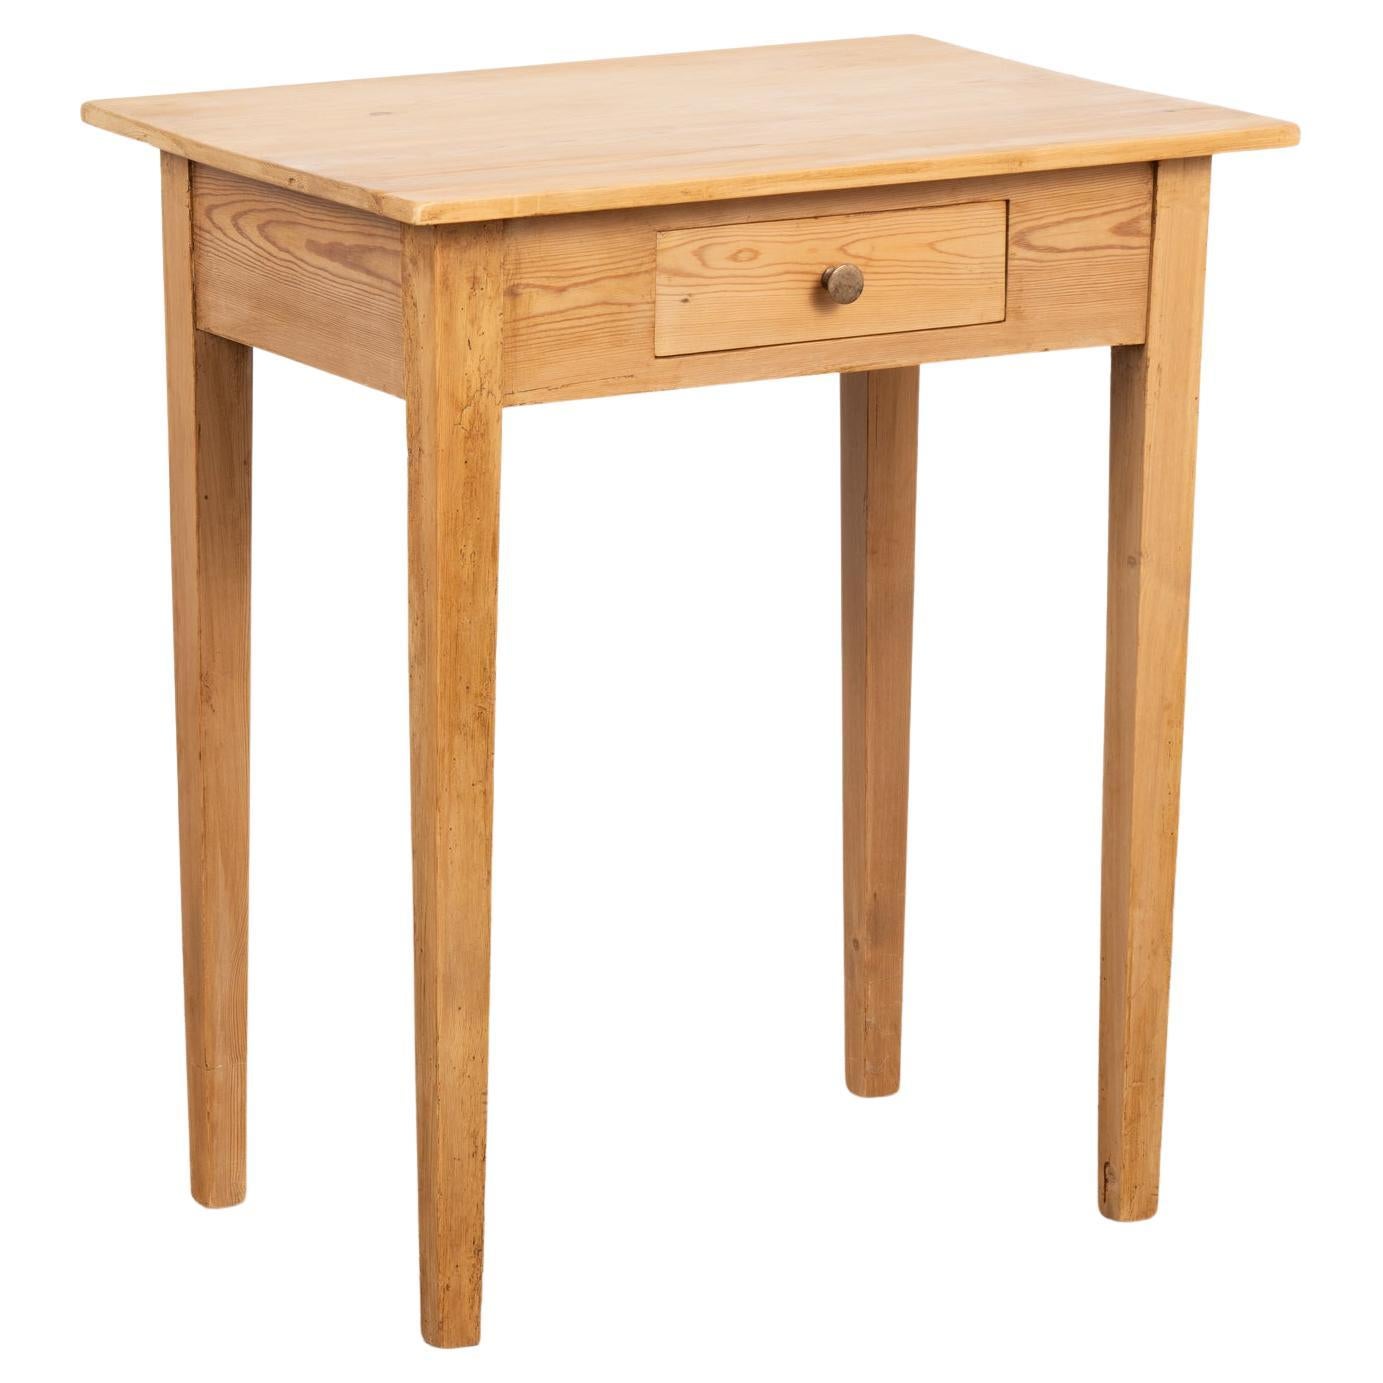 Small Pine Side Table With Tapered Legs, Denmark circa 1900's For Sale